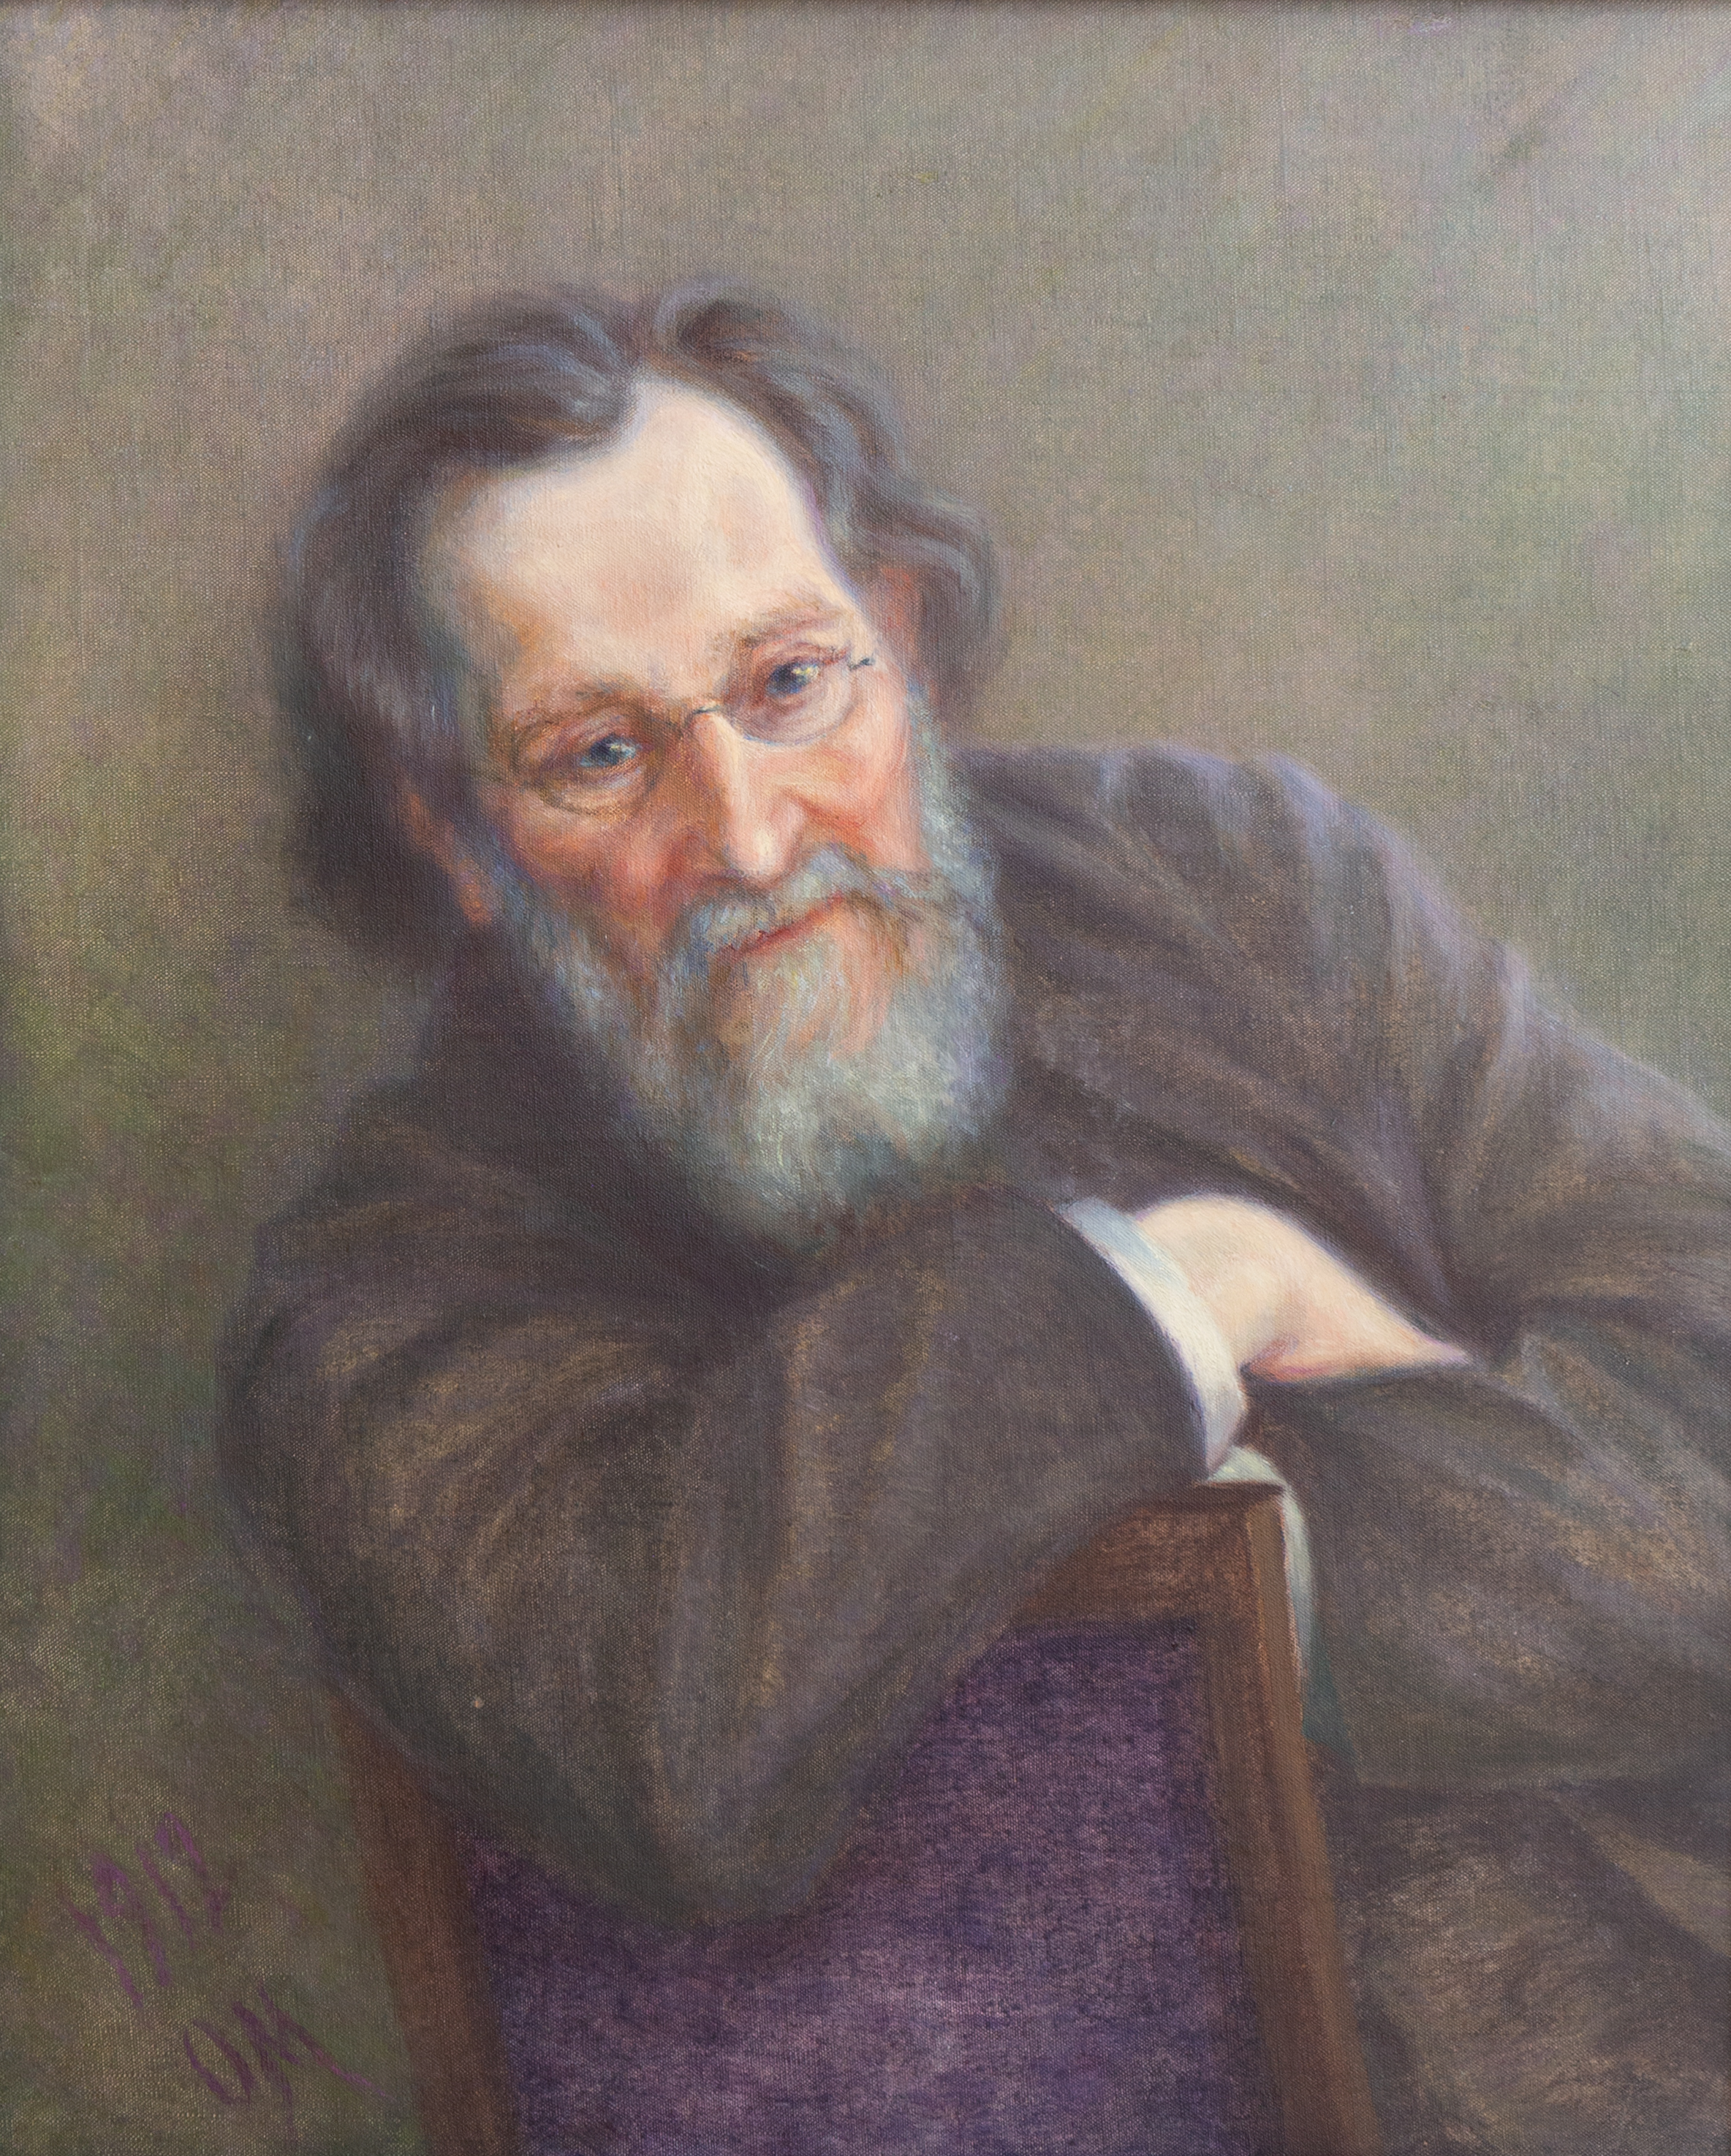 Portrait painting of Ilya Mechnikov. He is sitting on a chair and resting his elbow on the back of it, half-turned and looking straight ahead.